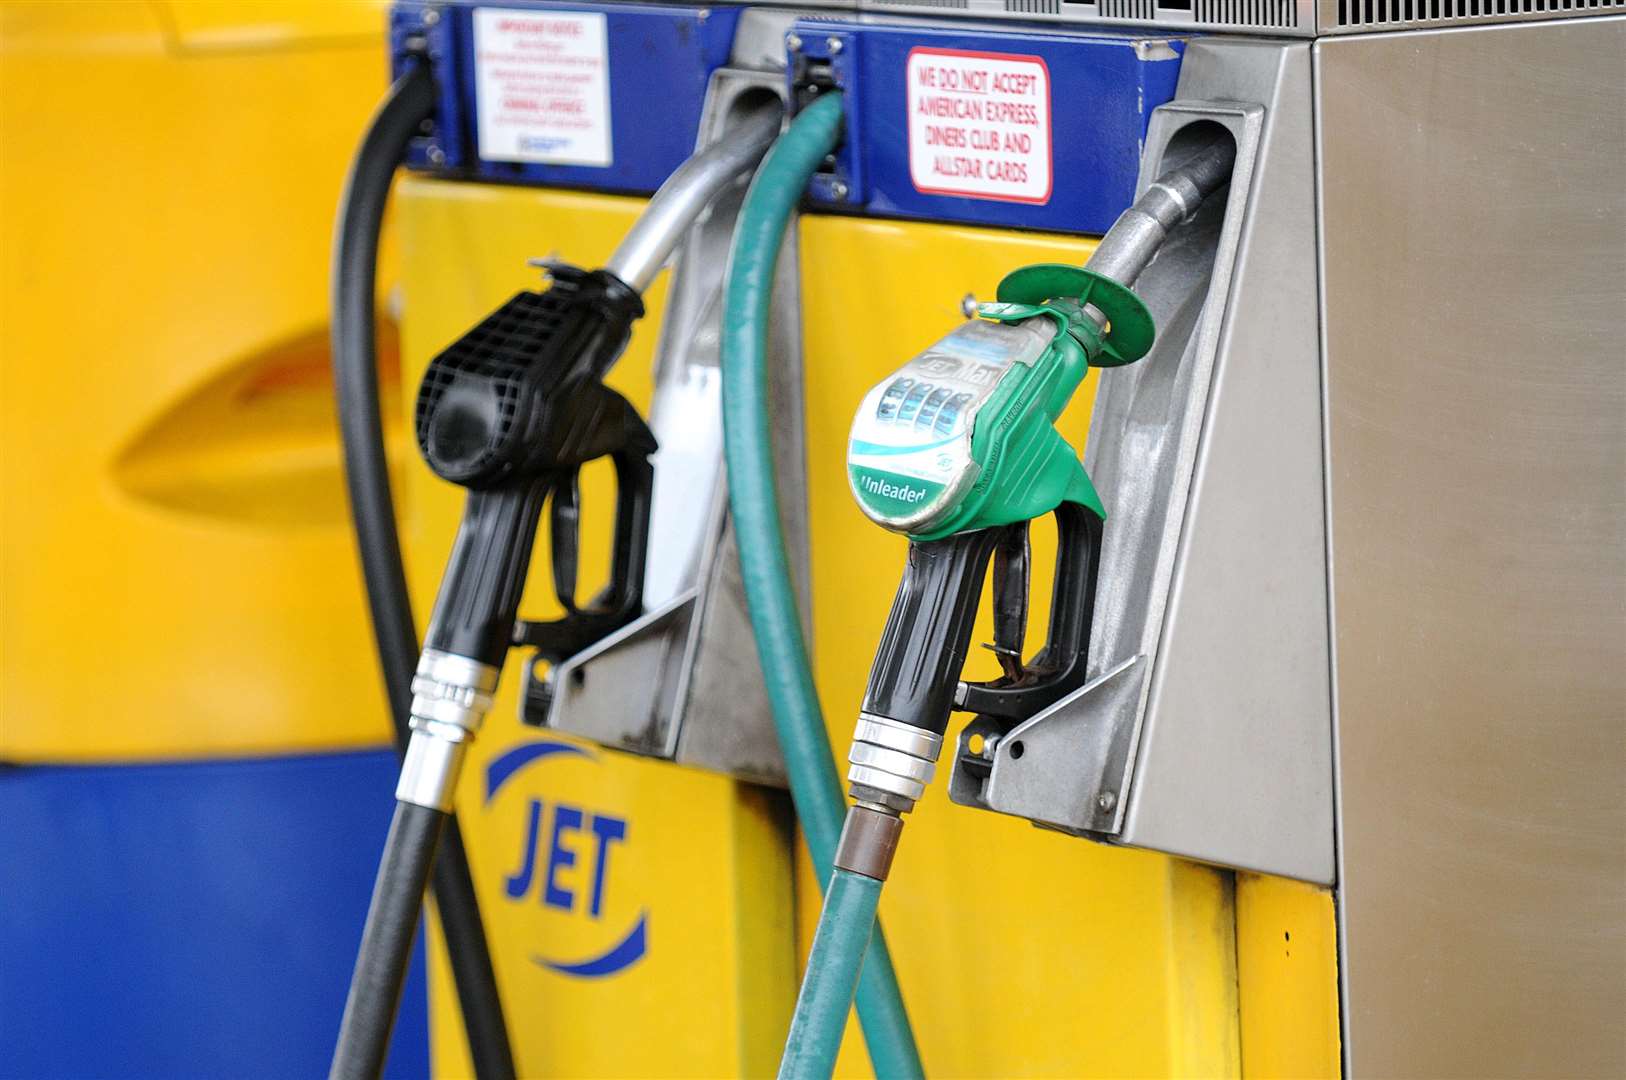 Reclaiming petrol is one of the most frequent expenses claims